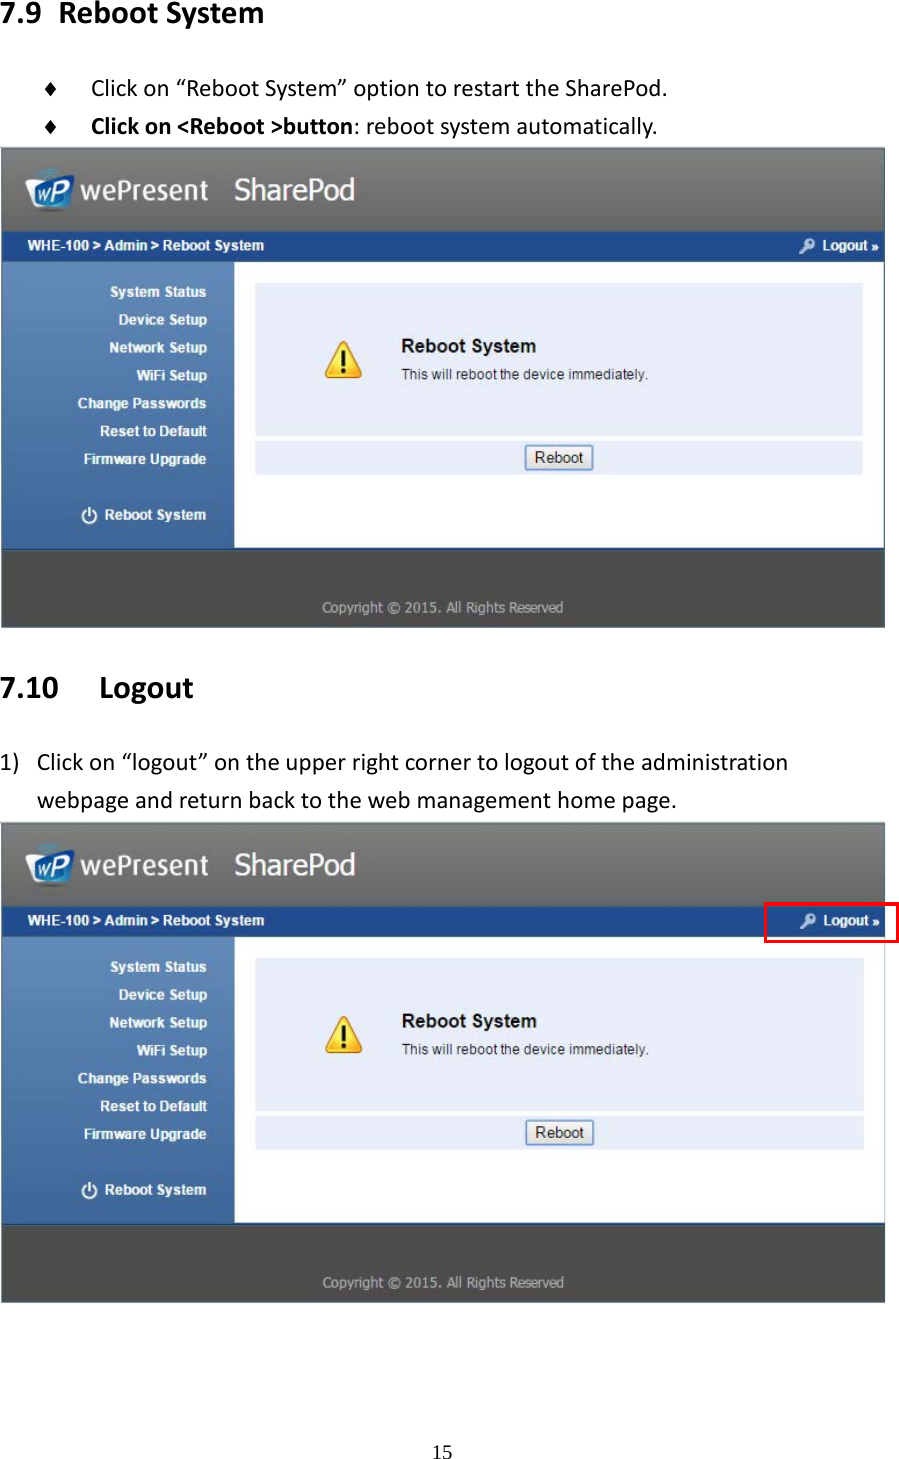   15 7.9 Reboot System ♦ Click on “Reboot System” option to restart the SharePod. ♦ Click on &lt;Reboot &gt;button: reboot system automatically.   7.10 Logout 1) Click on “logout” on the upper right corner to logout of the administration webpage and return back to the web management home page.       